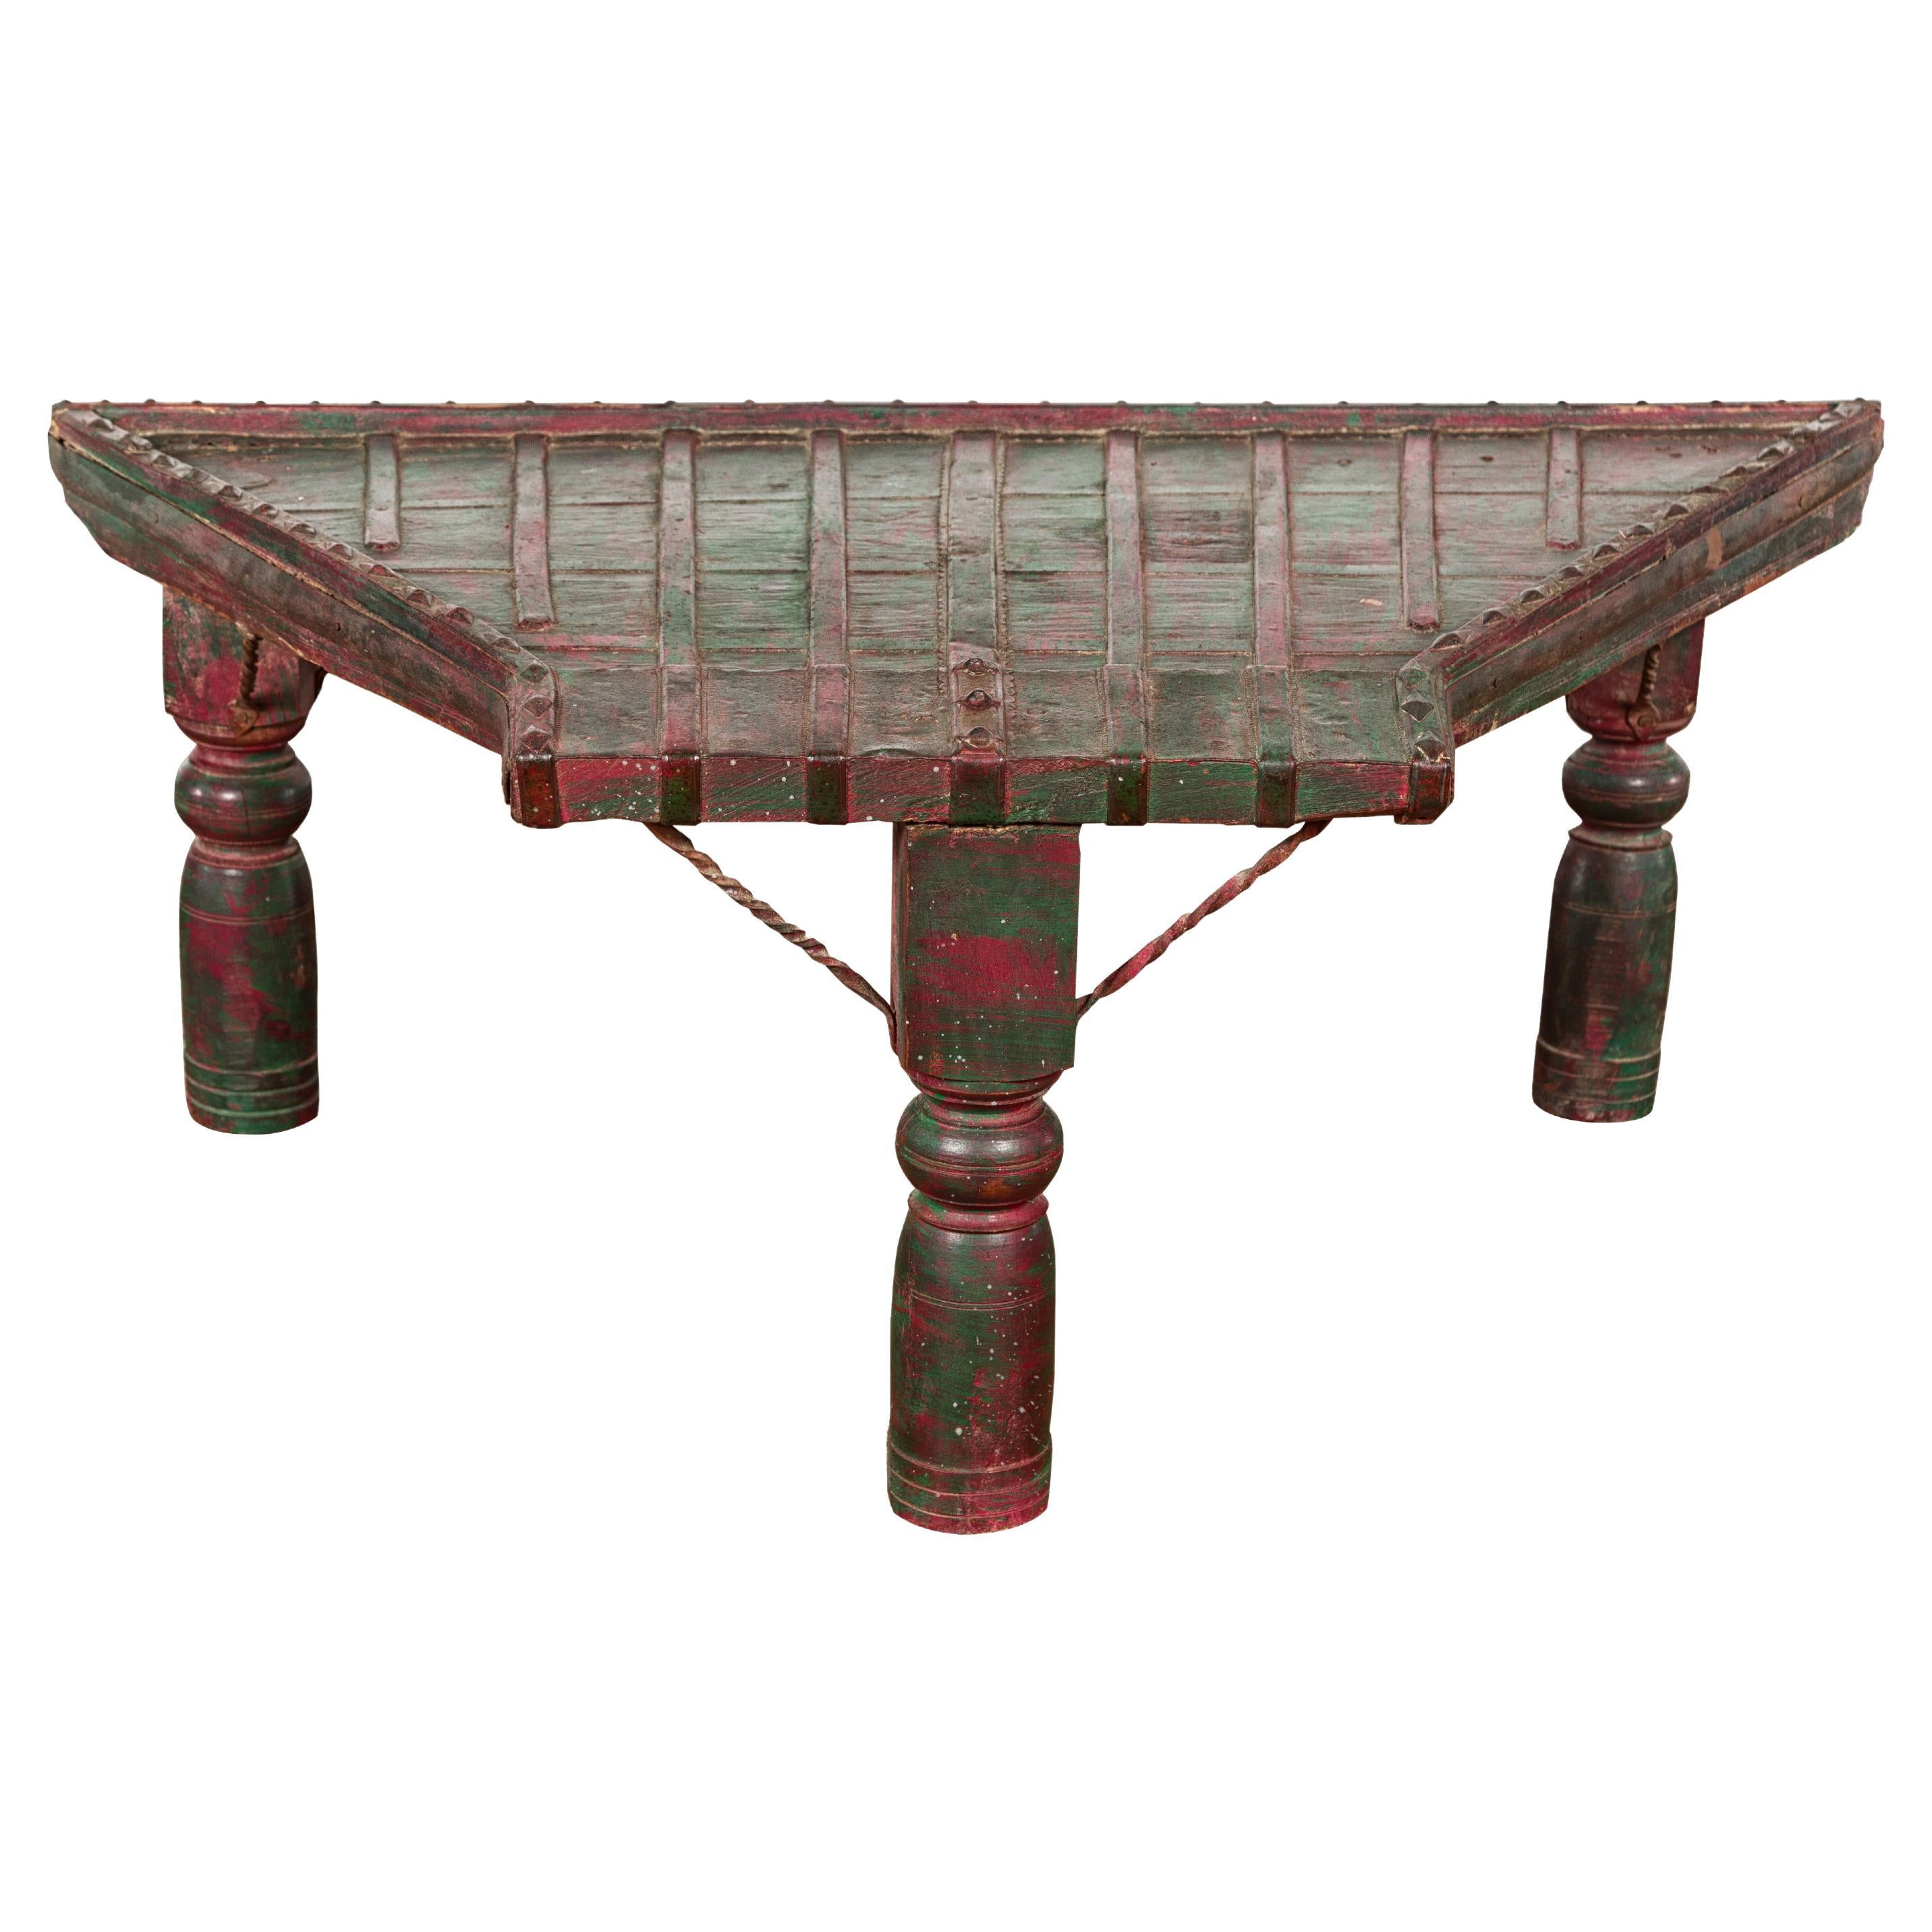 Rustic Coffee Table with Red and Green Lacquer, Turned Baluster Legs and Iron For Sale